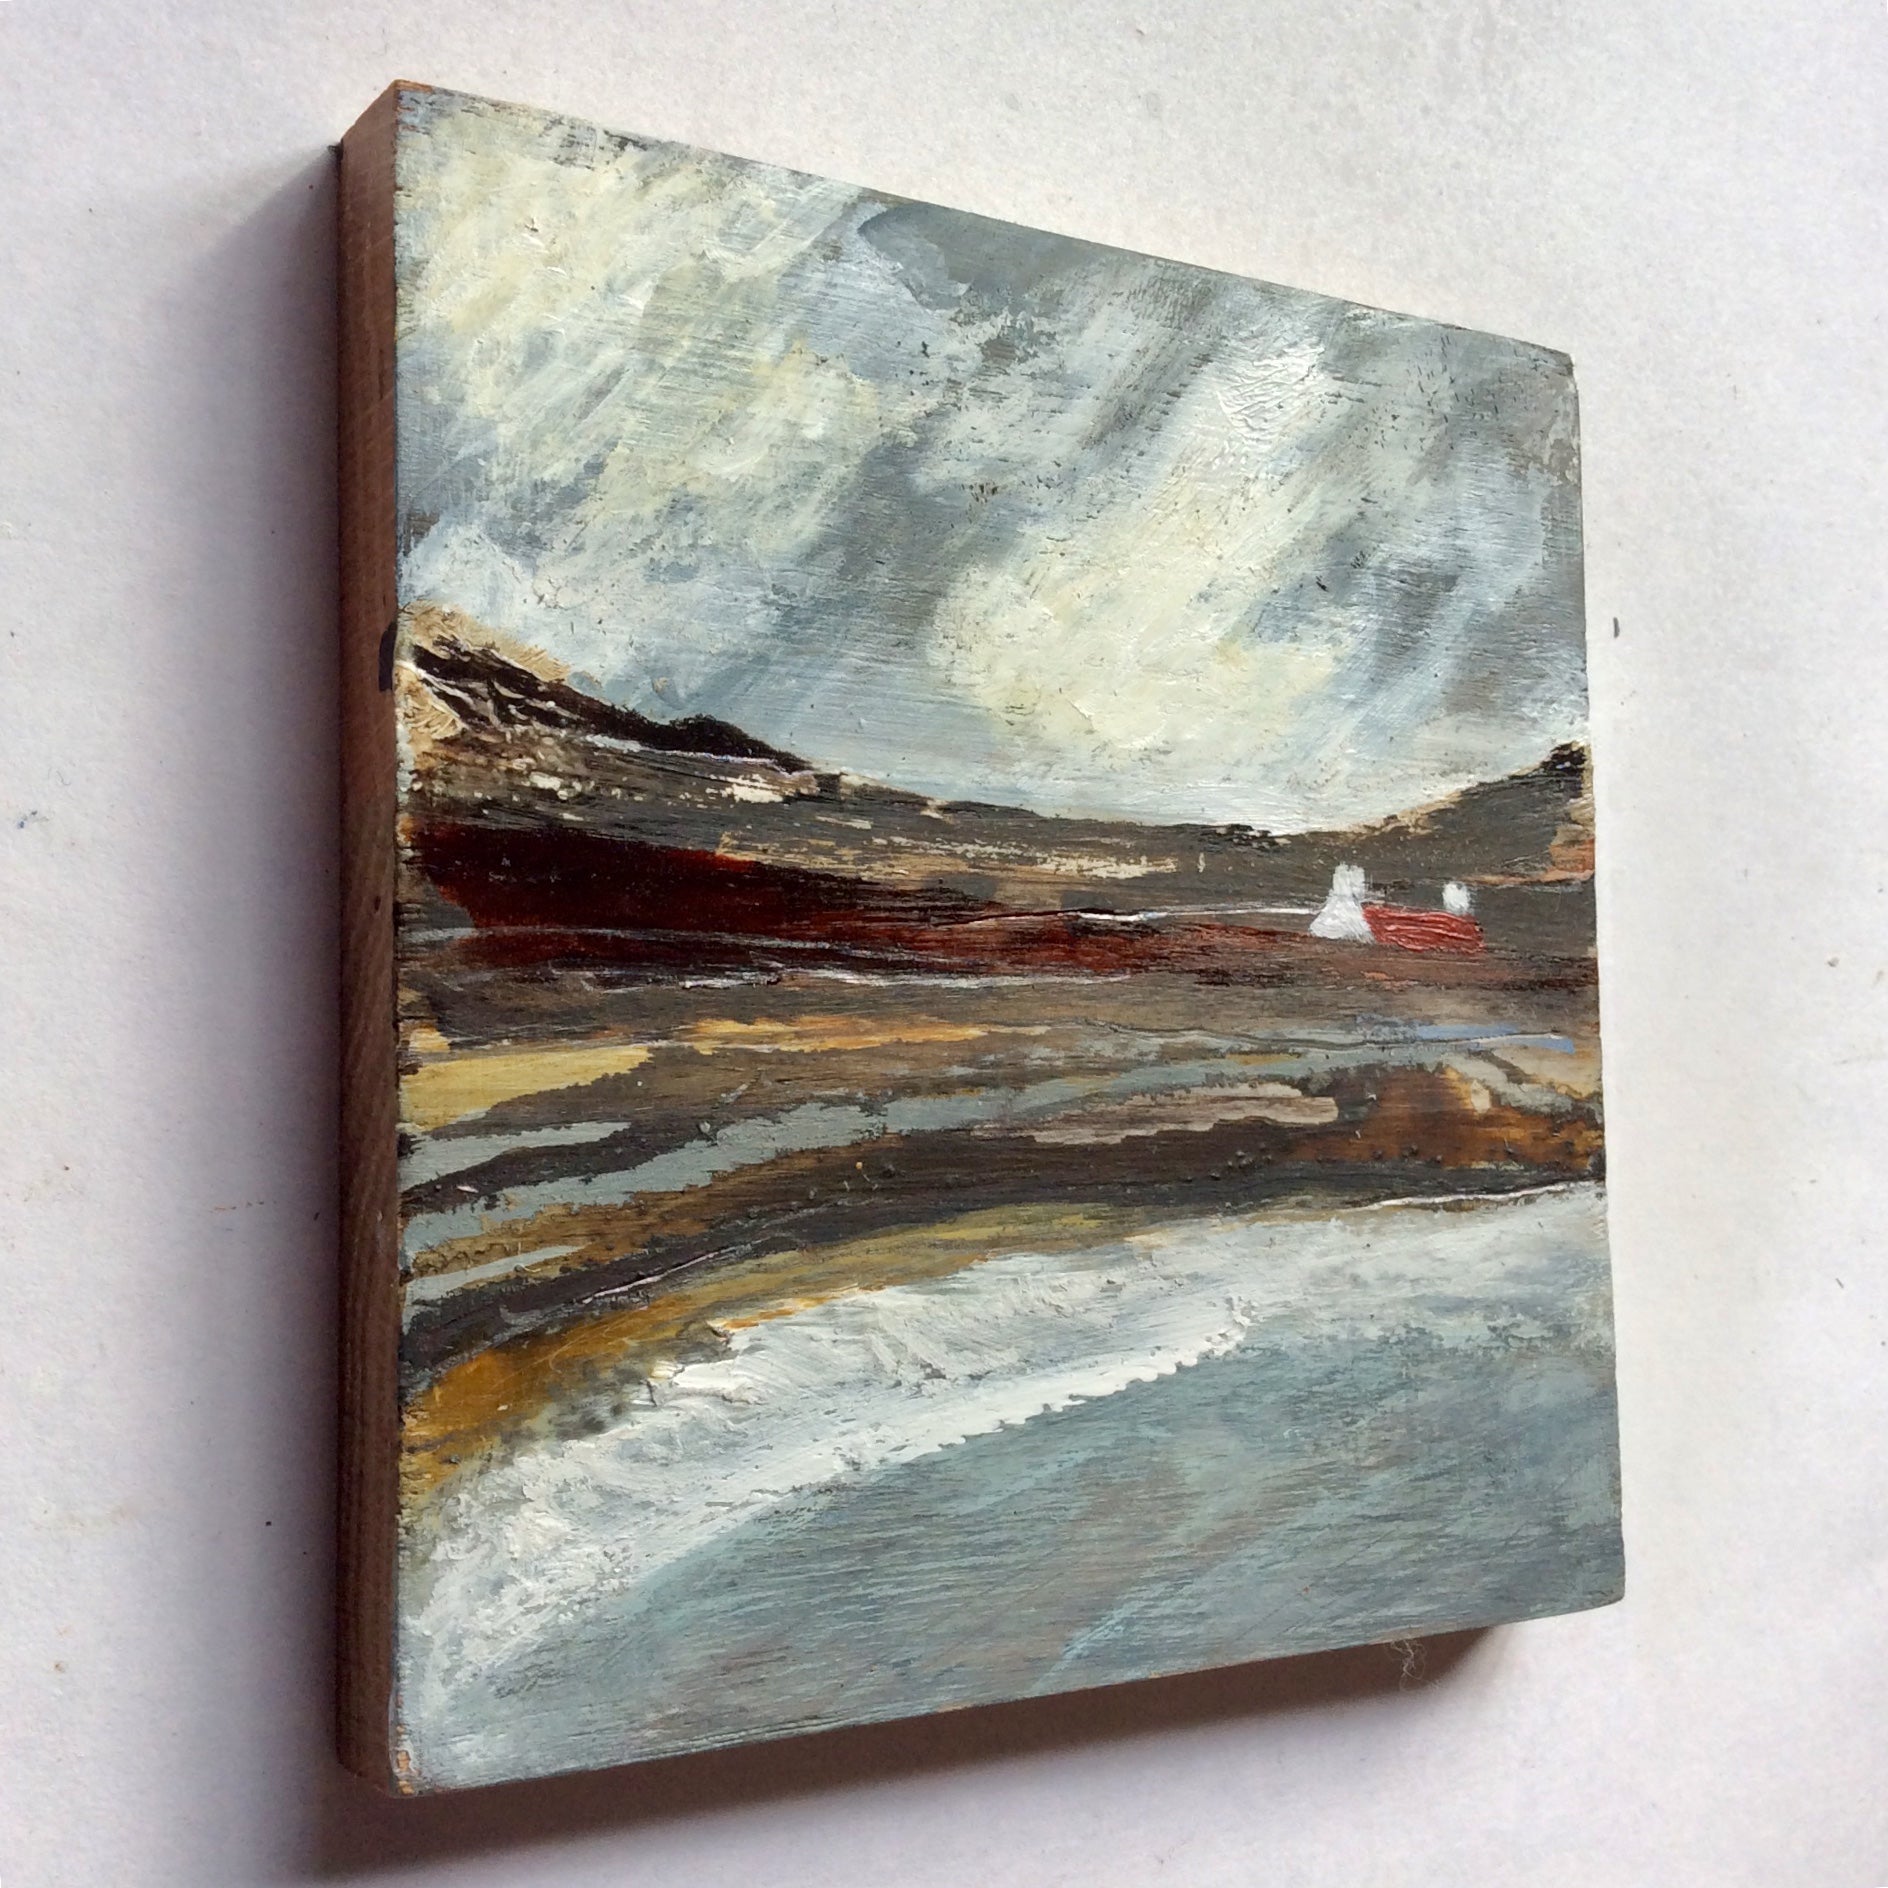 Mini Mixed Media Art on wood By Louise O'Hara - "A storm at high tide”